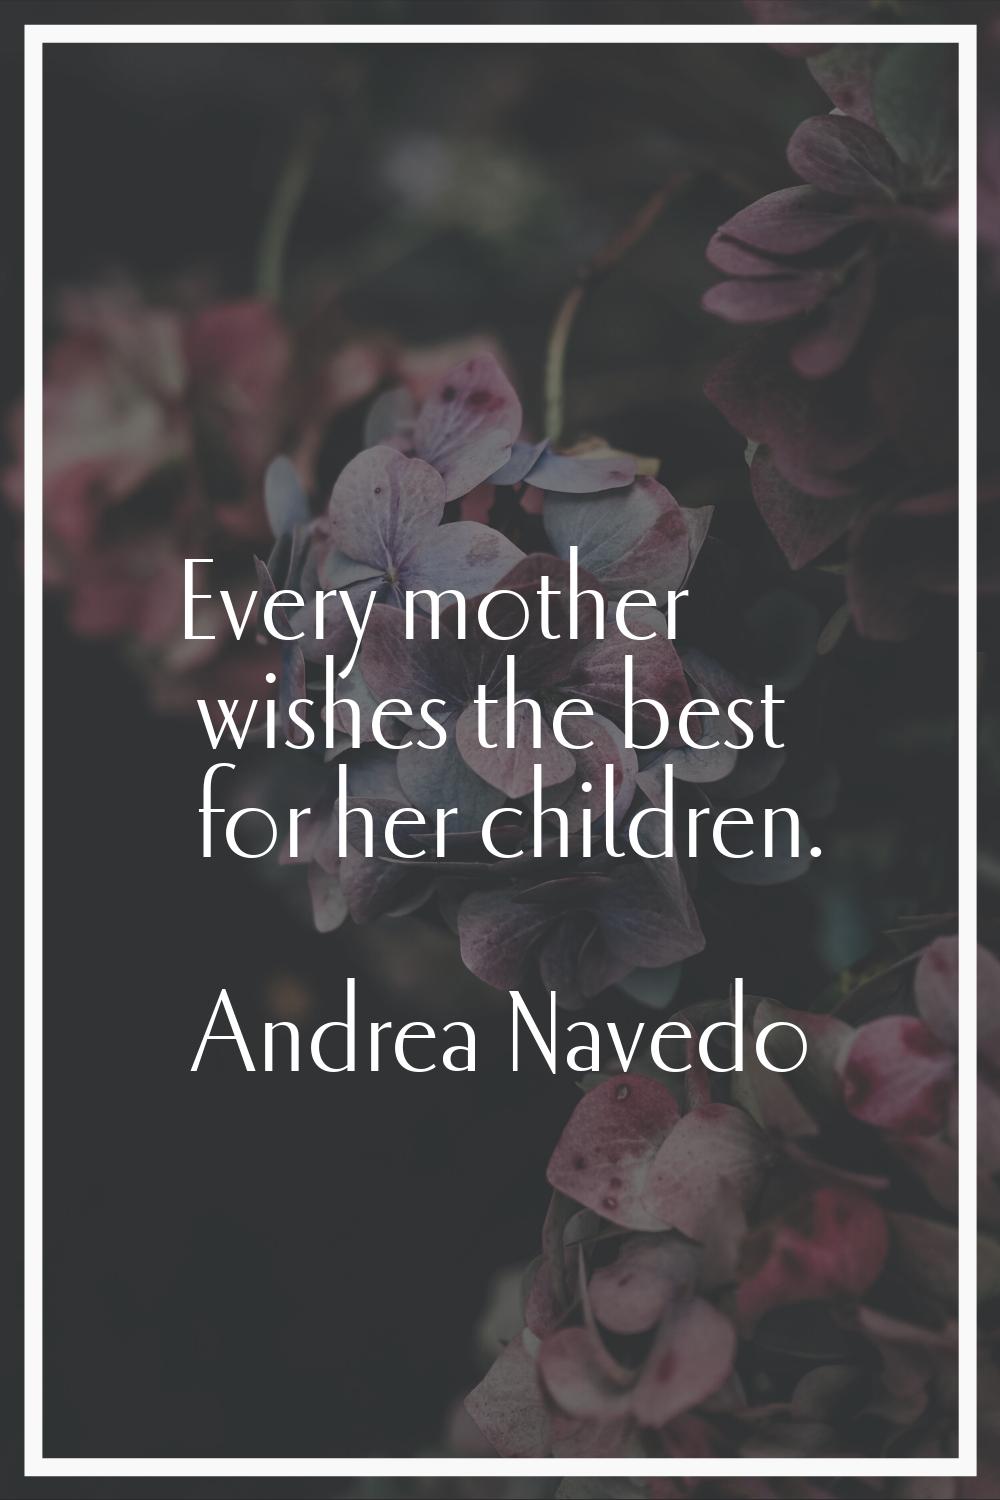 Every mother wishes the best for her children.